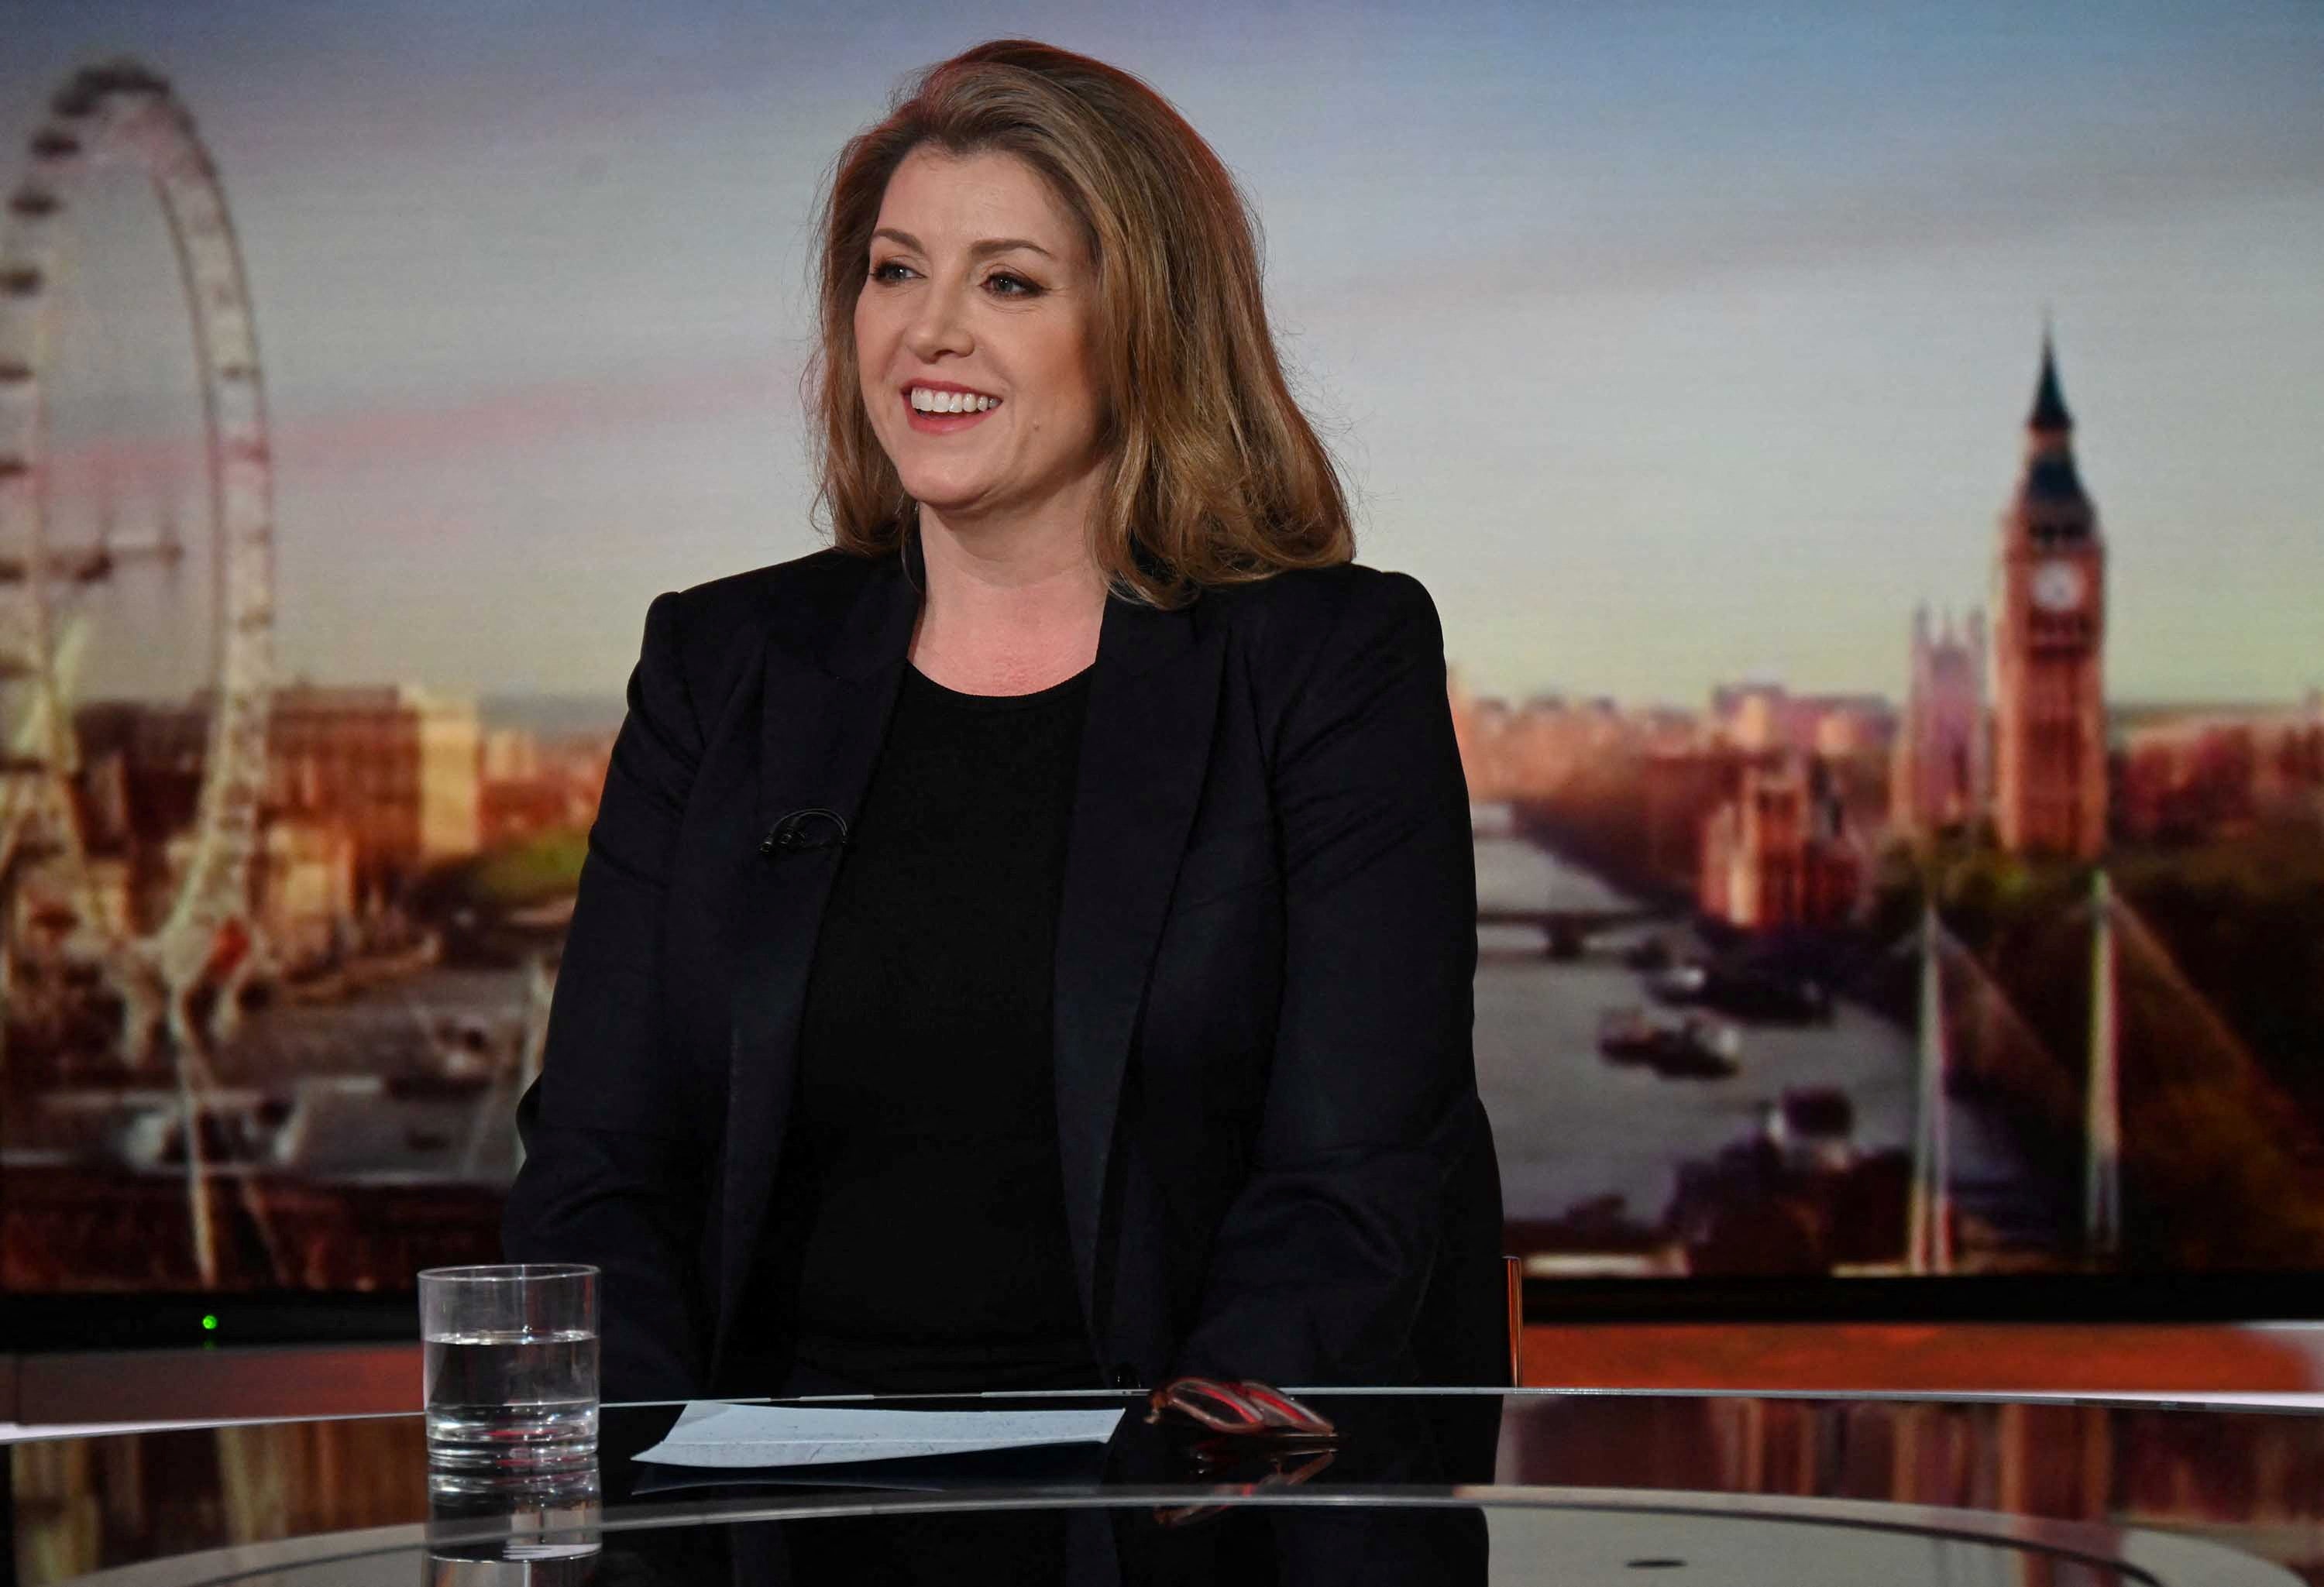 Penny Mordaunt is the bookies’ favourite to win the leadership race